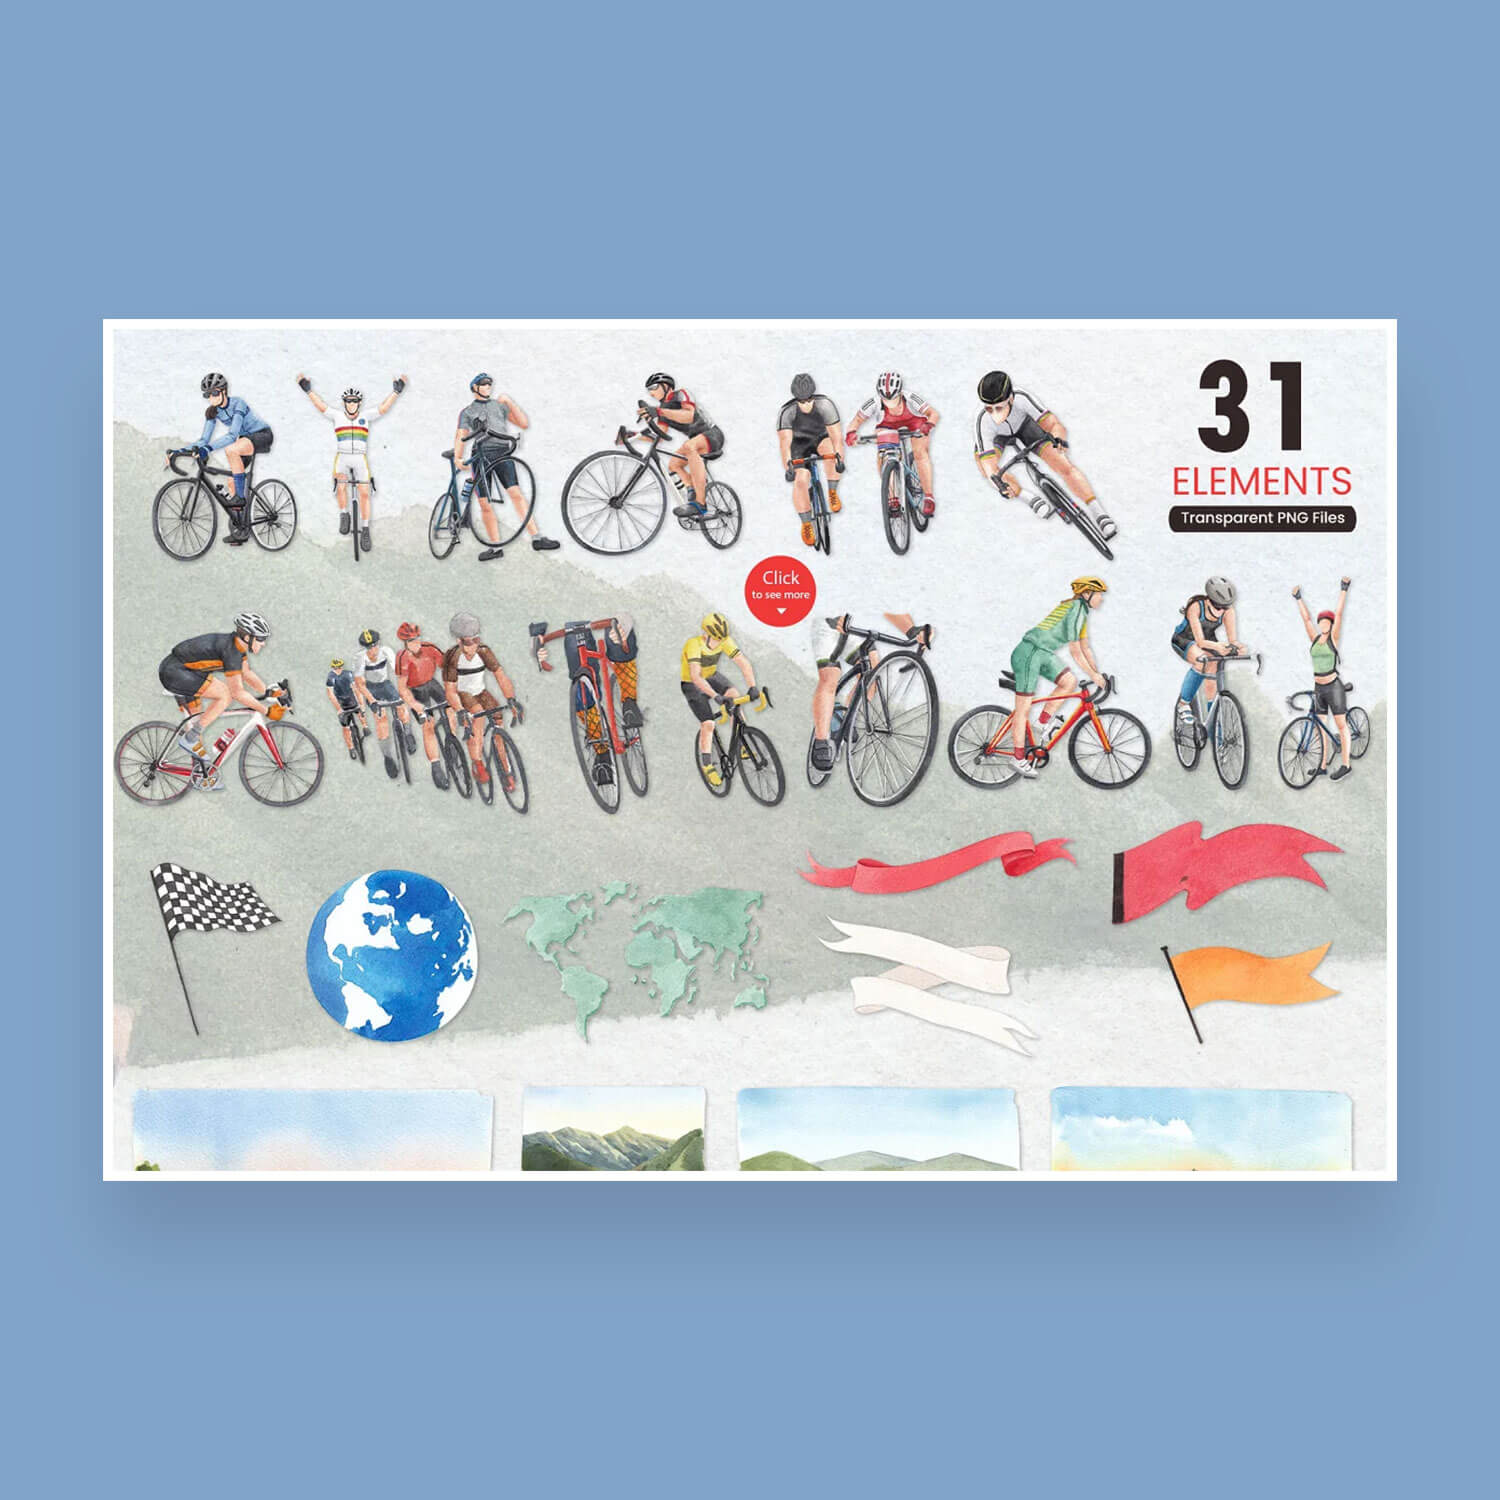 31 Elements Transparent PNG Files, bicycle riding watercolor.